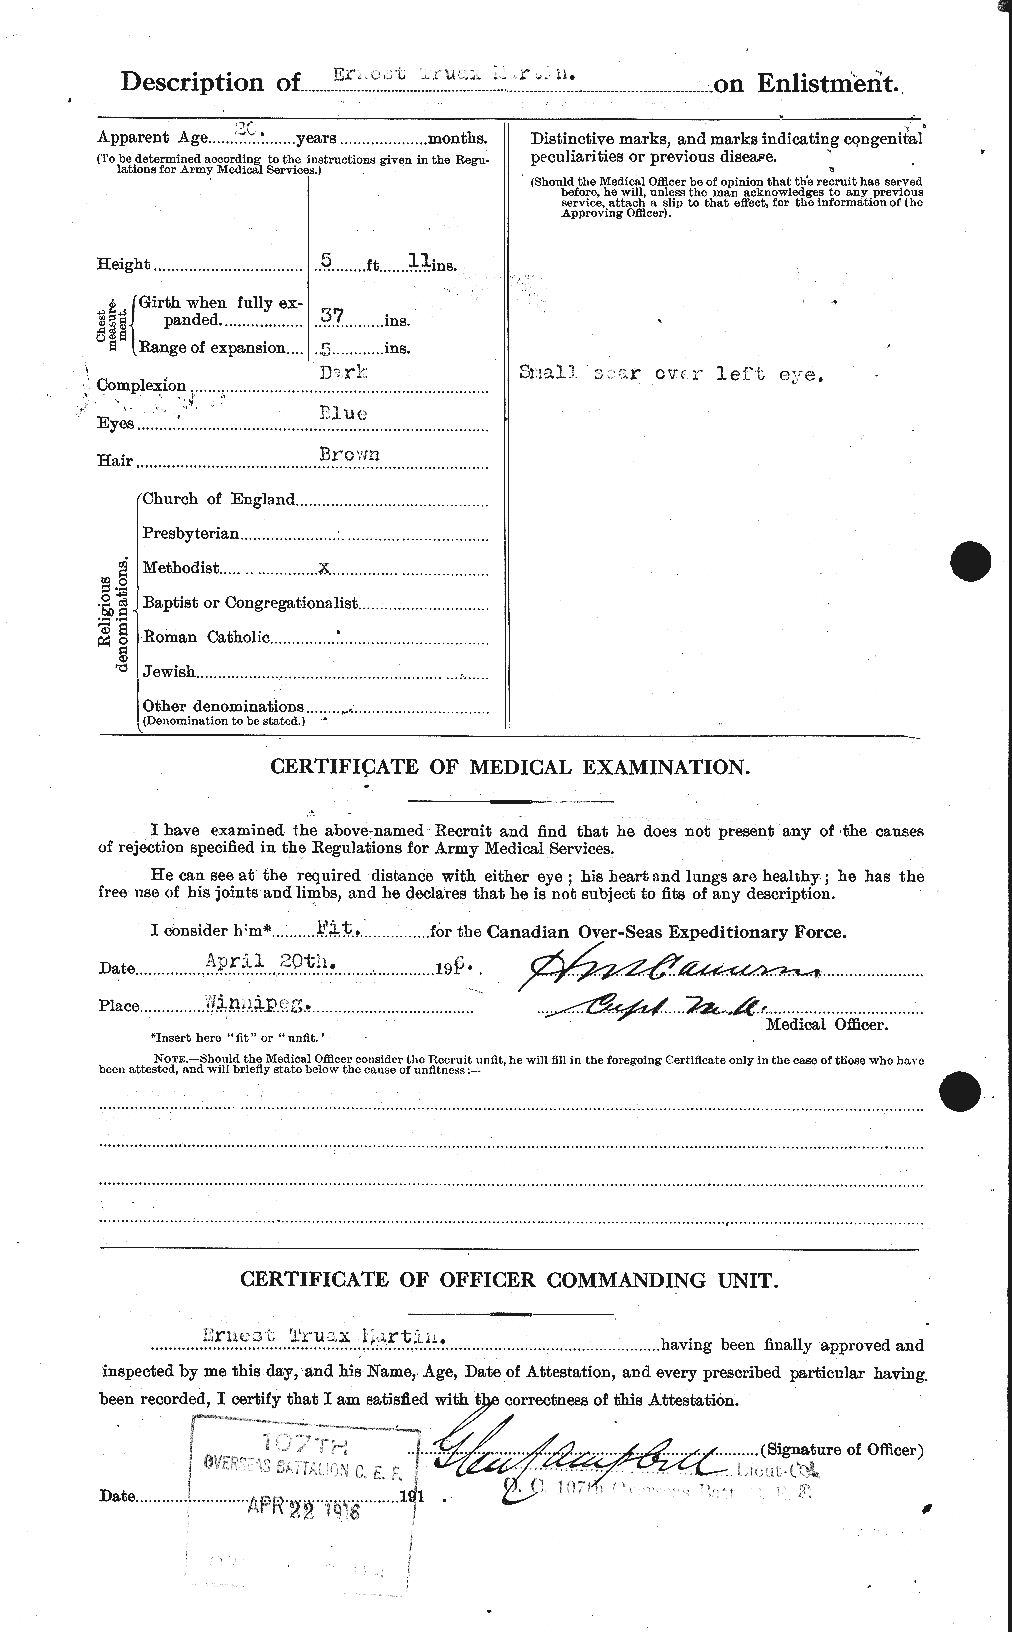 Personnel Records of the First World War - CEF 482941b